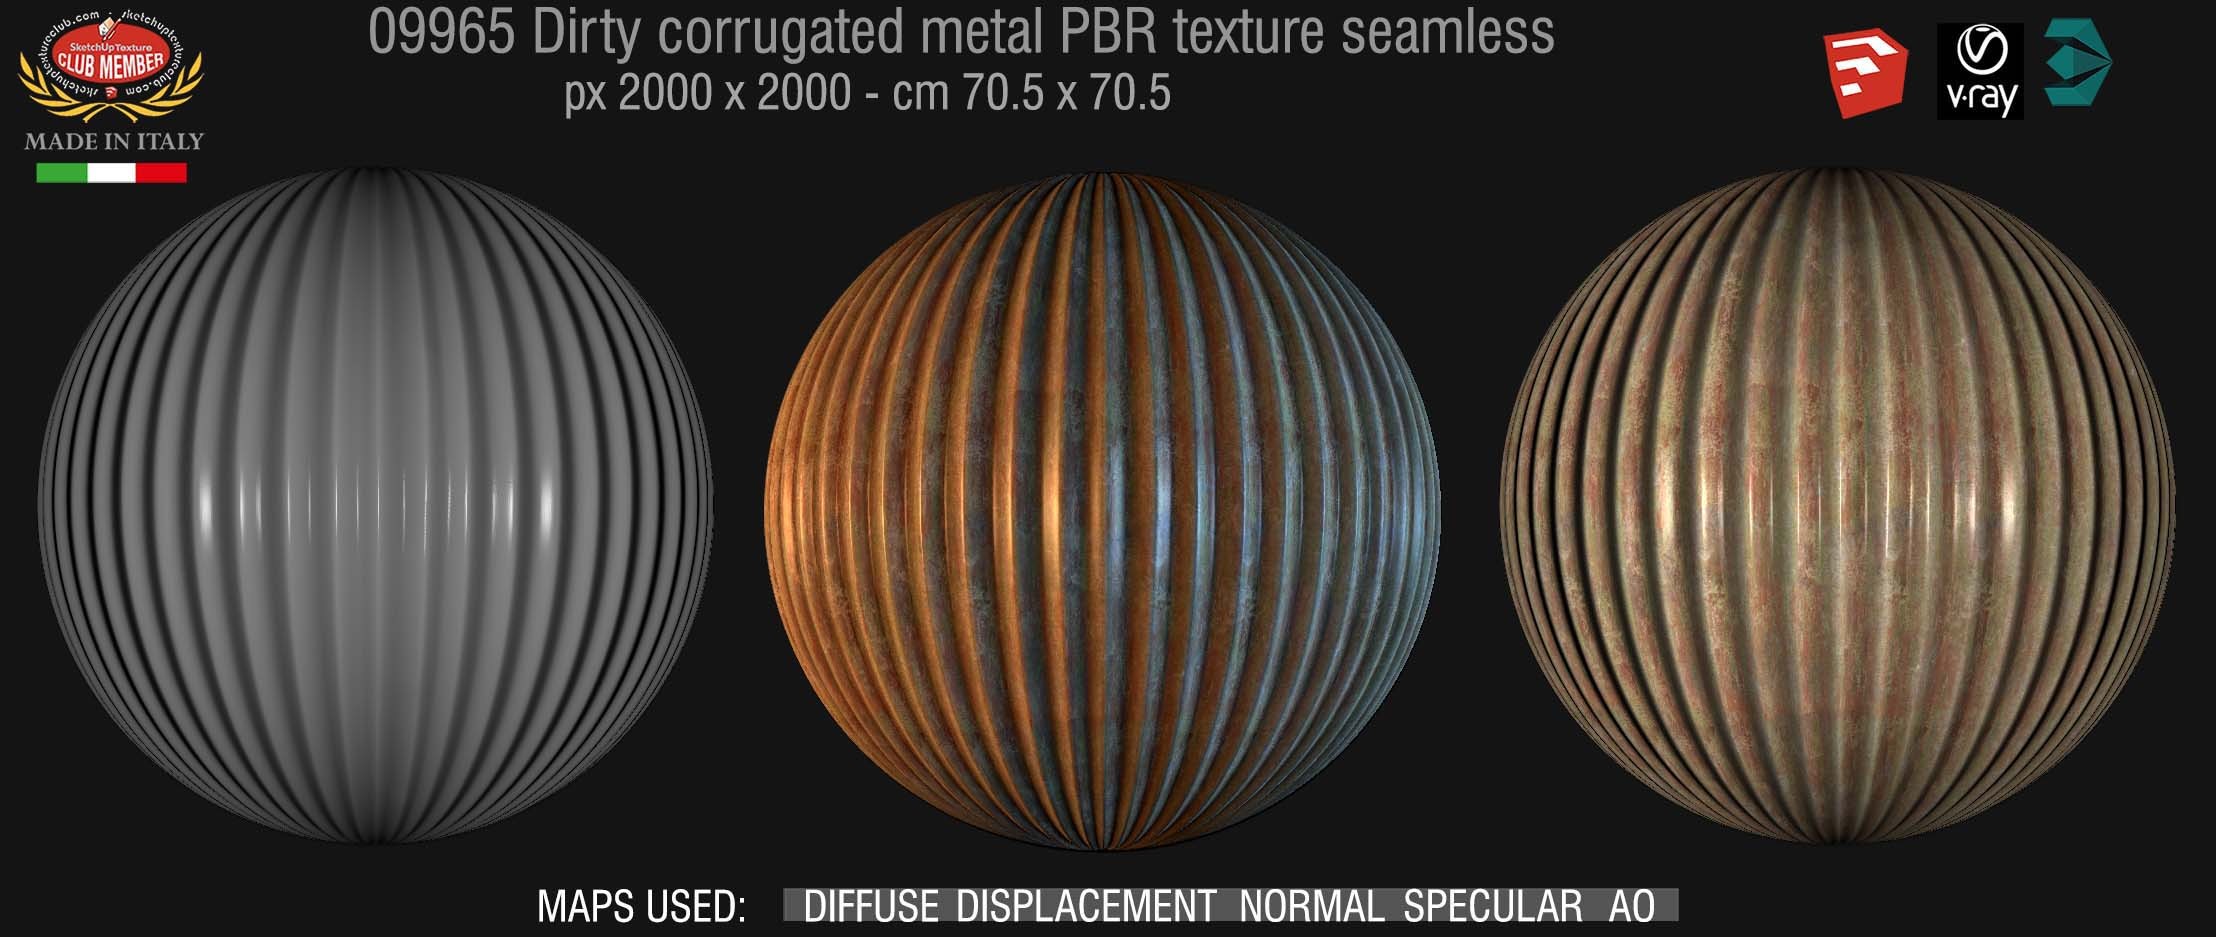 09965 Dirty corrugated metal PBR texture seamless DEMO